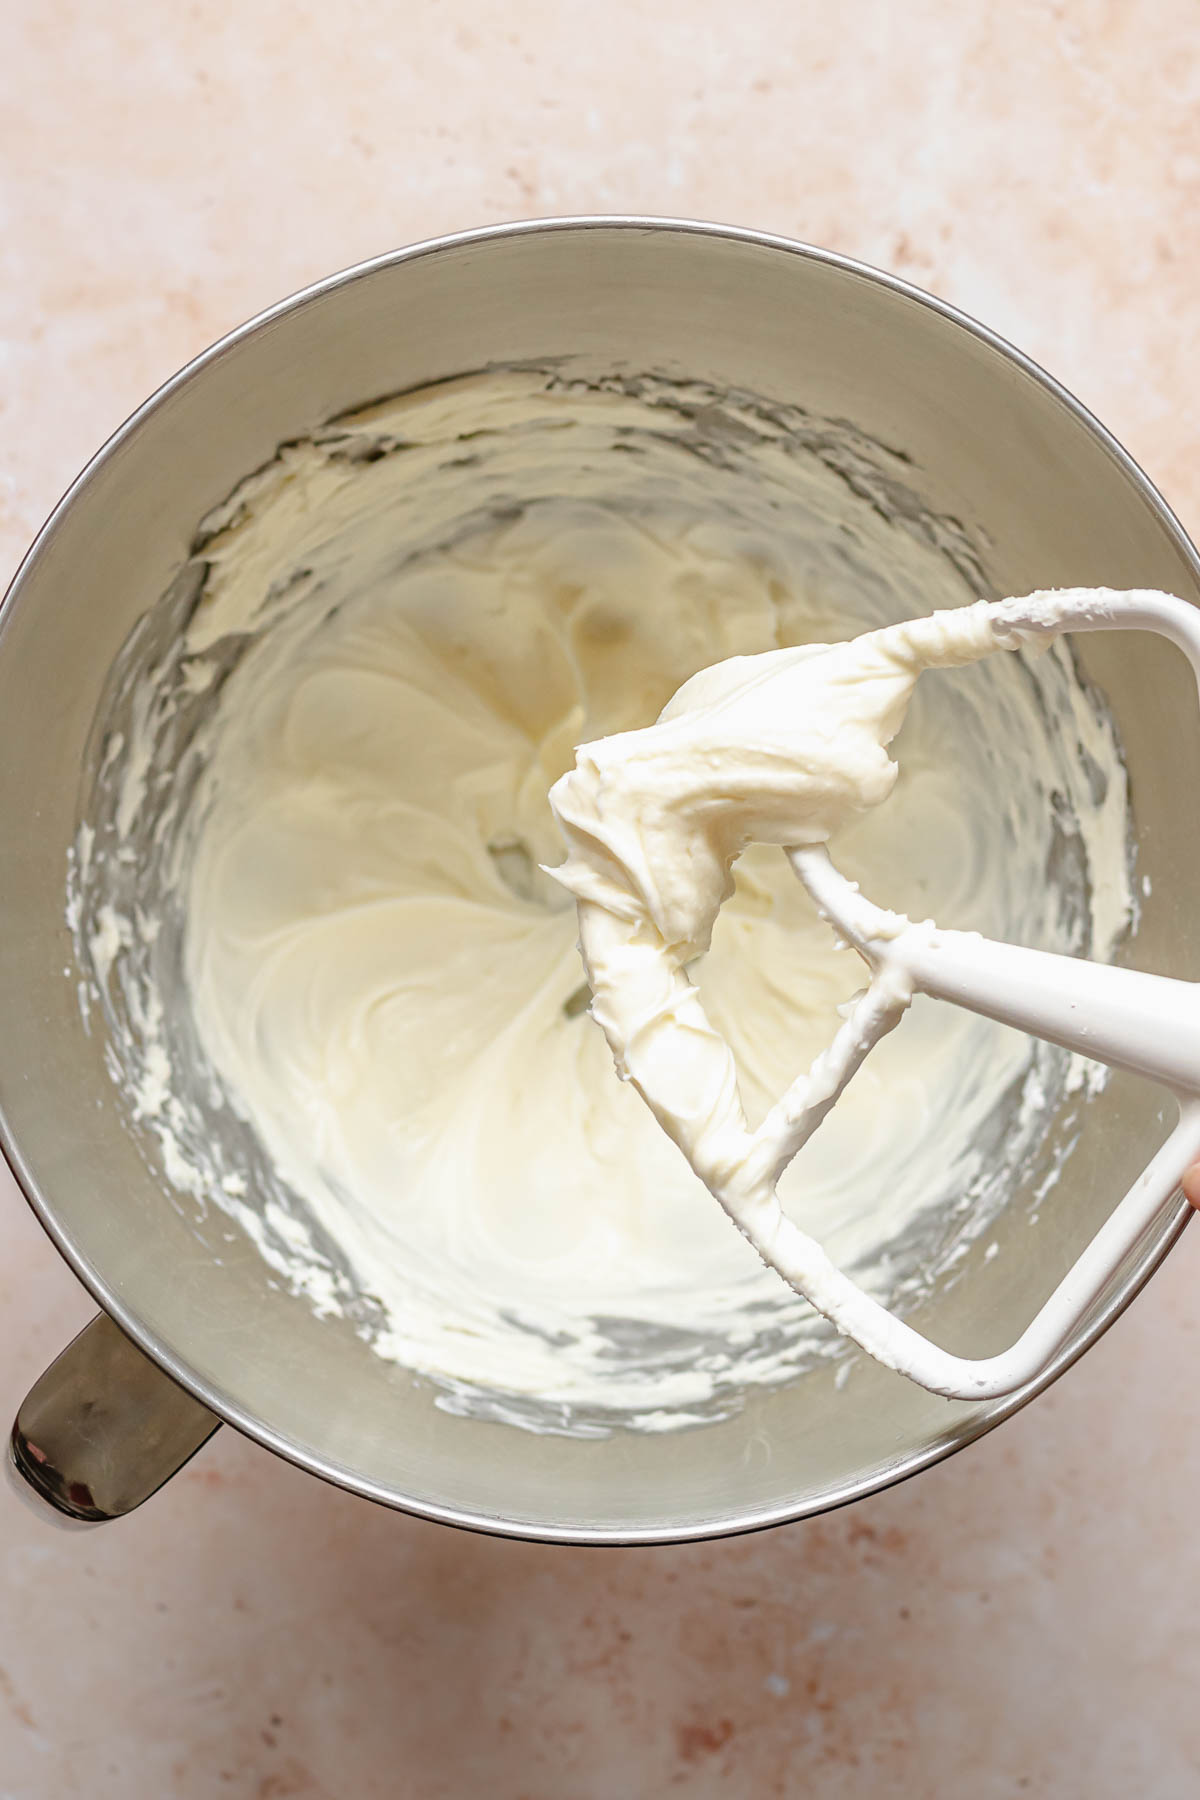 Creamed cream cheese in a bowl.